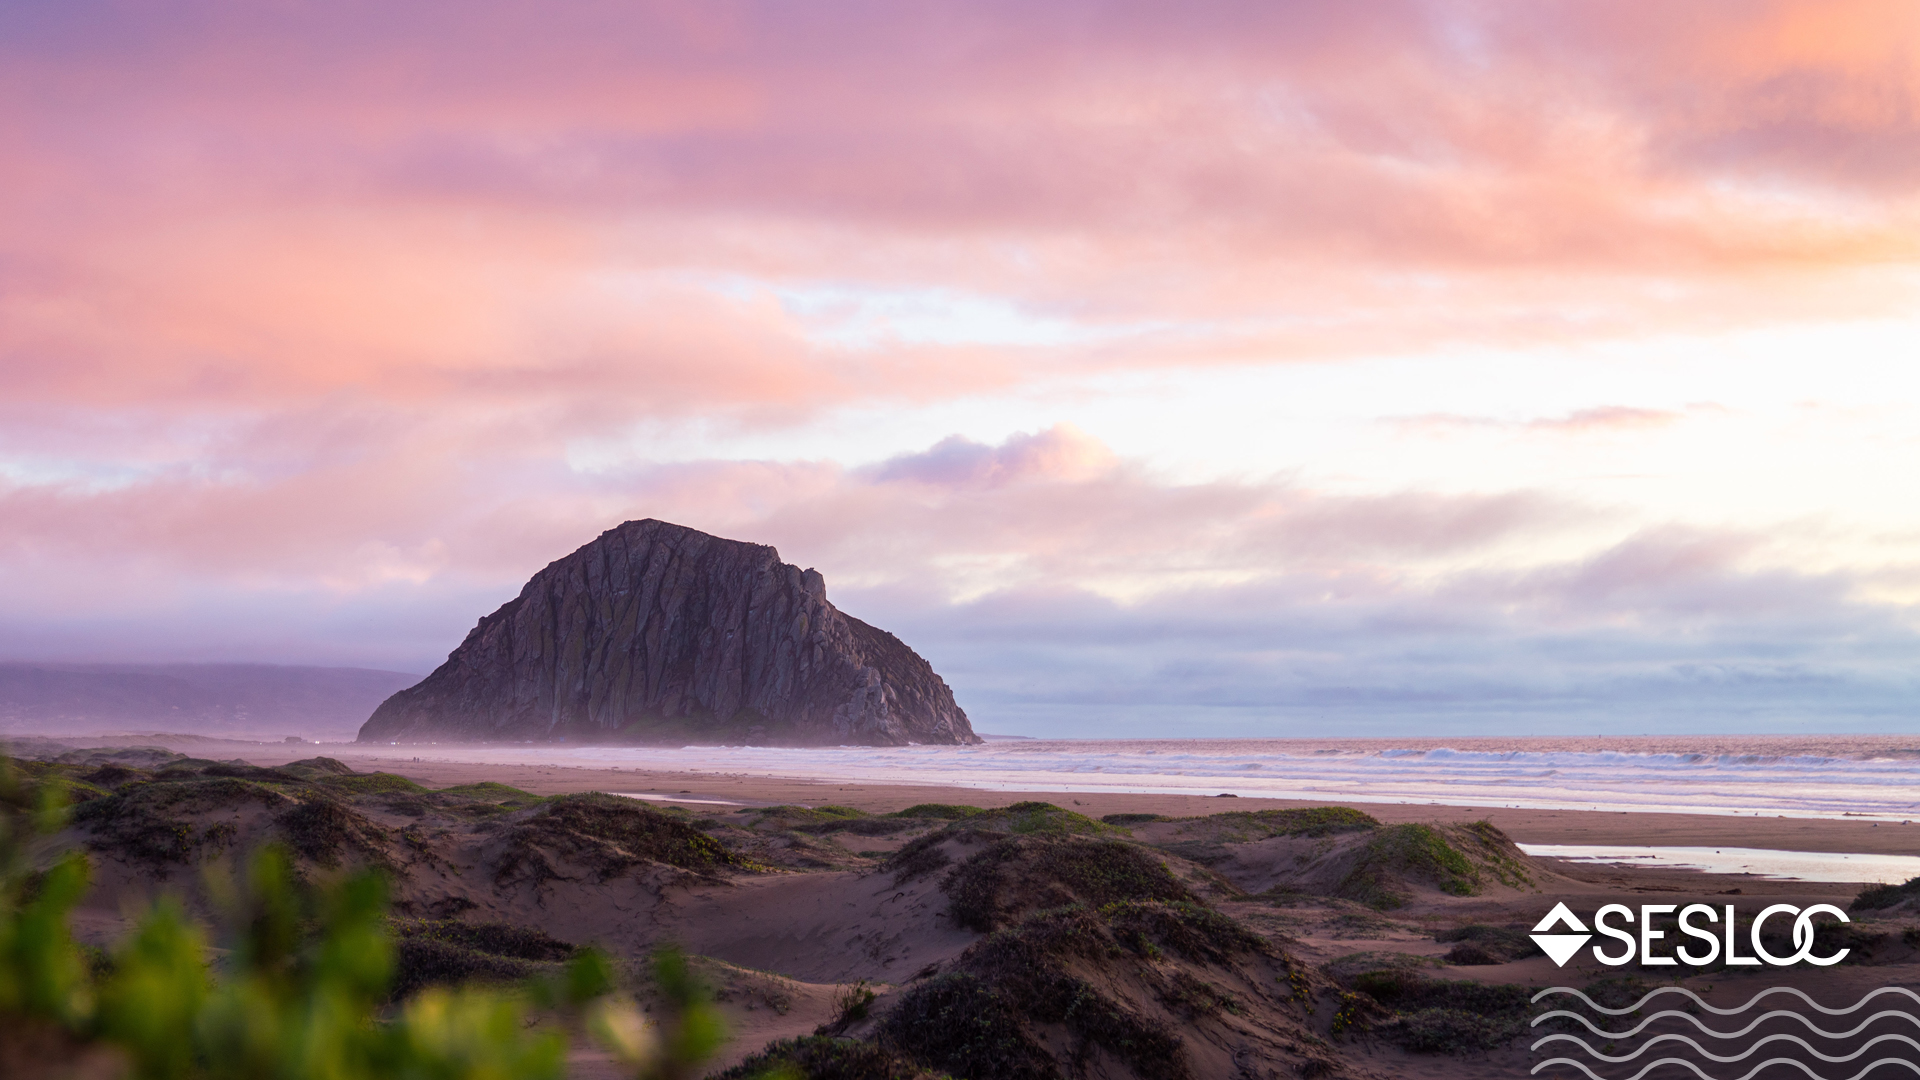 A view of Morro rock at sunset.